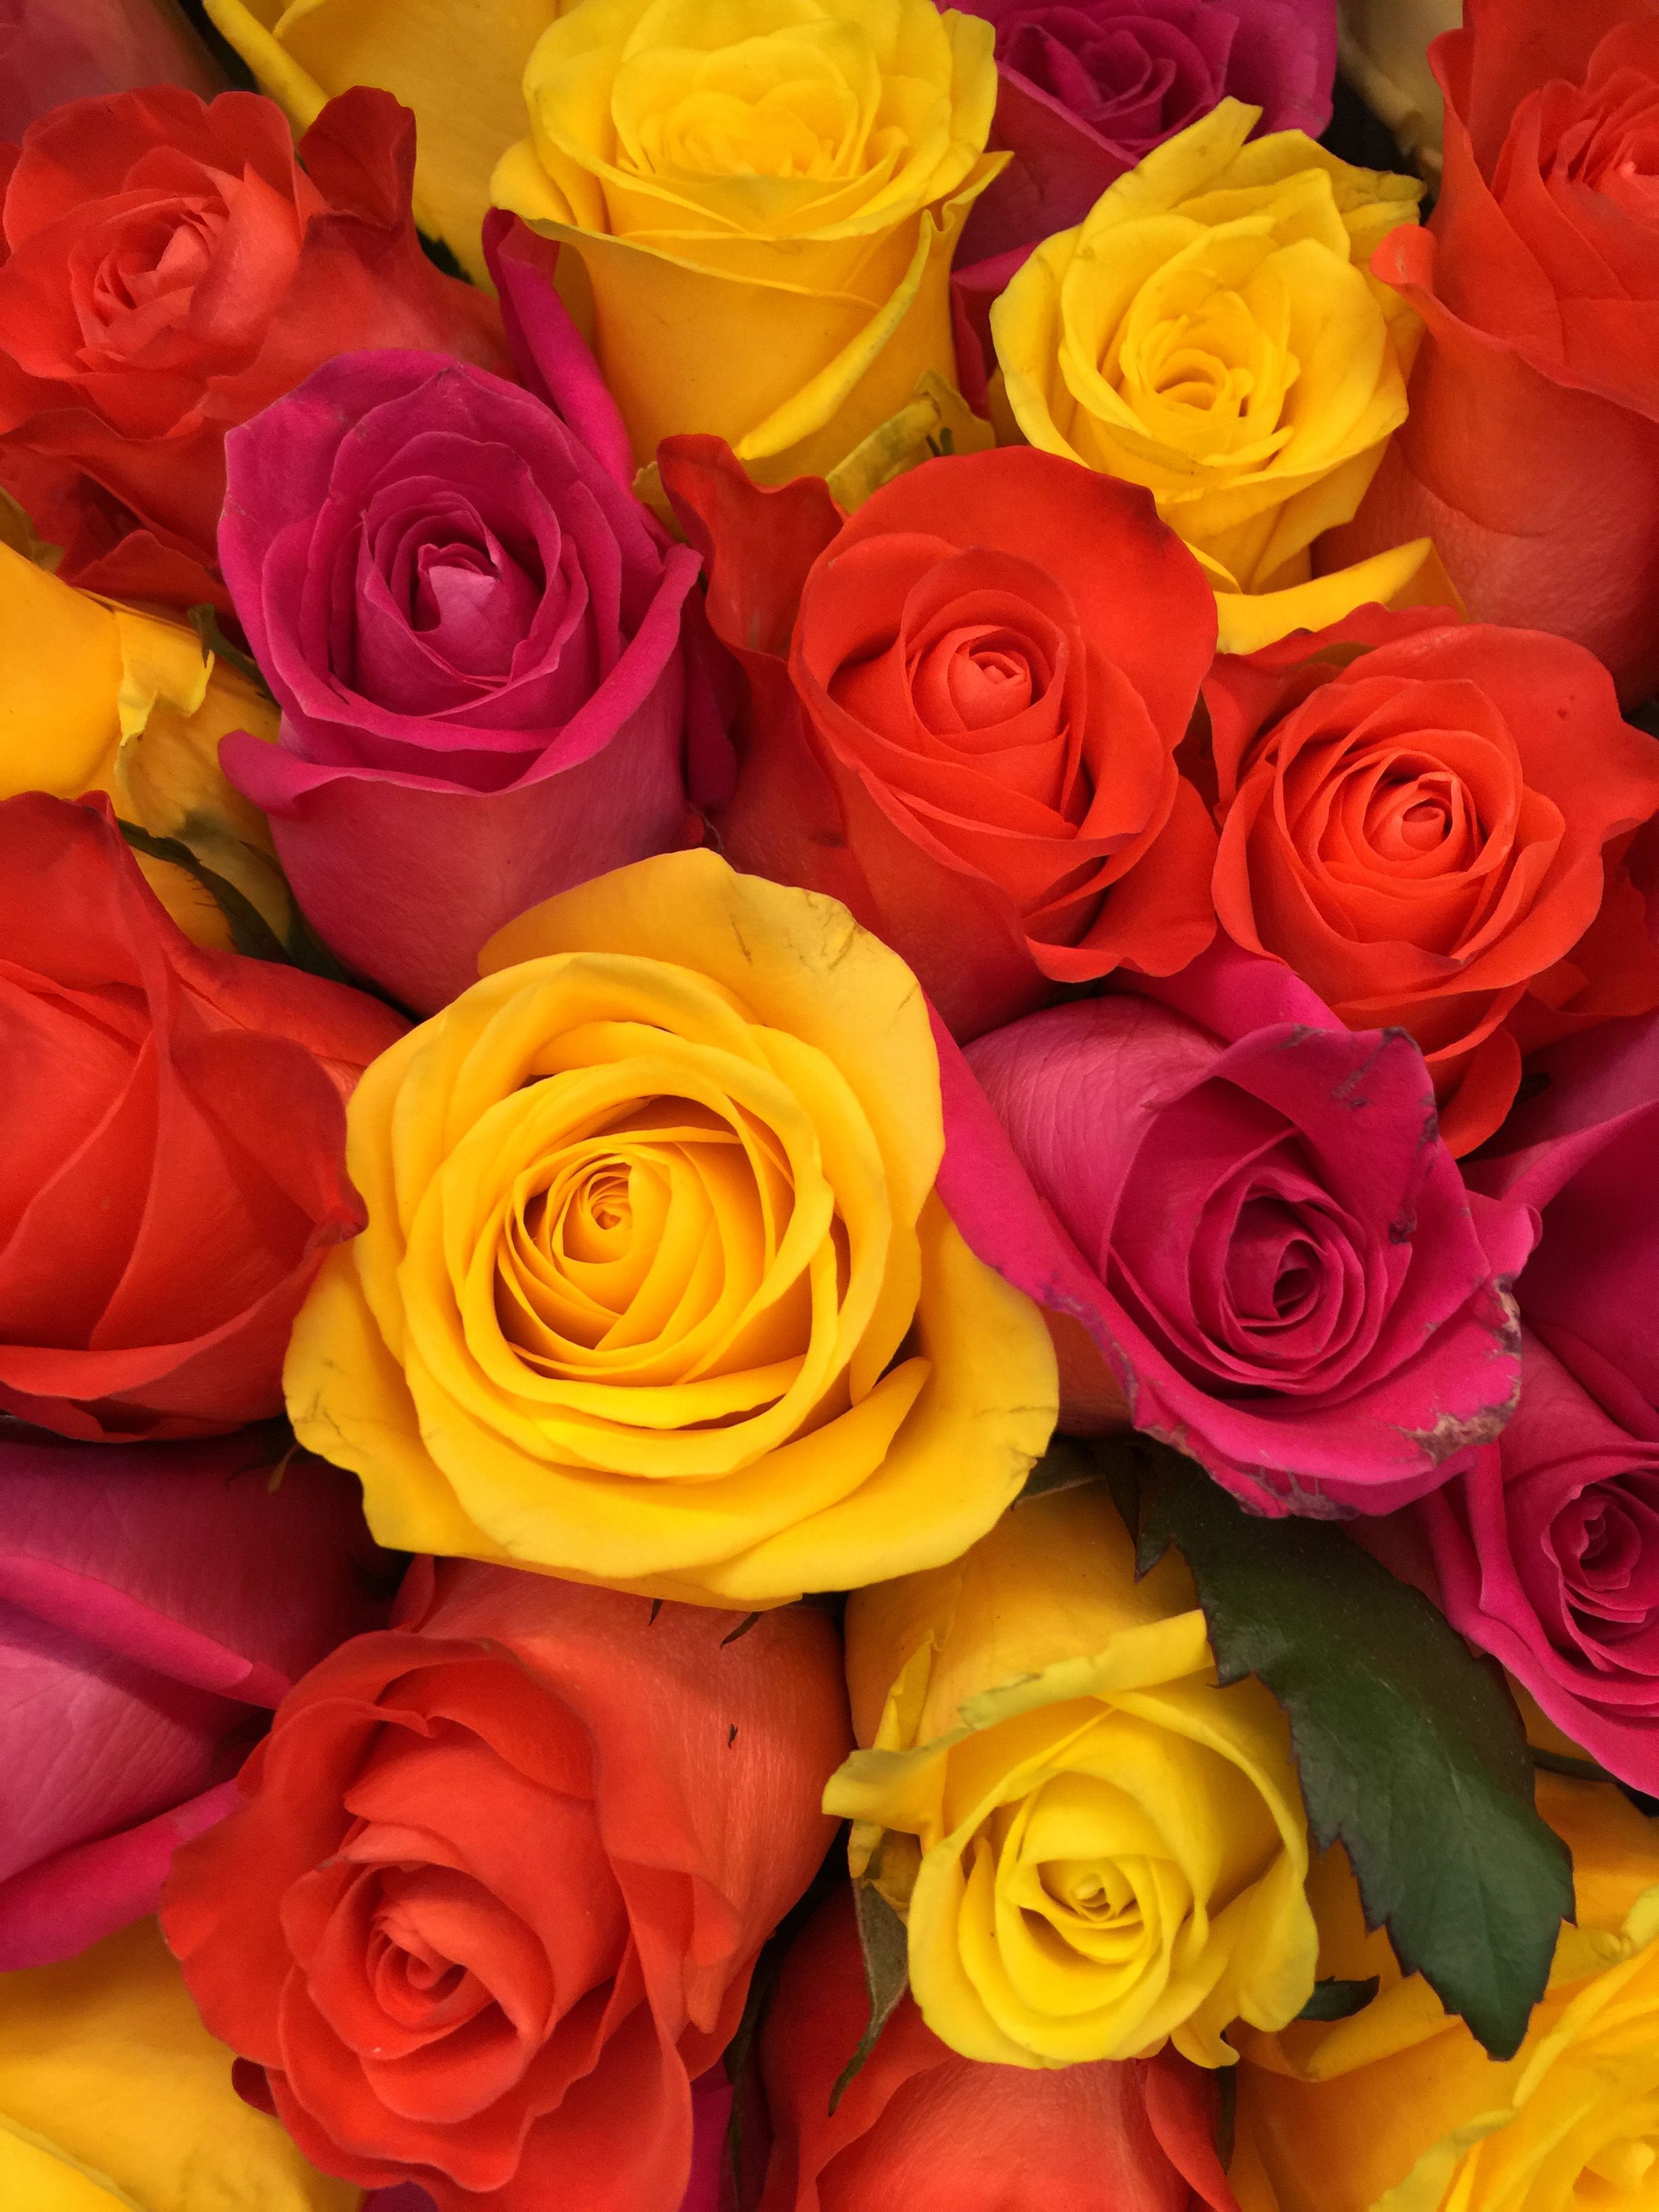 Red And Yellow Rose Wallpaper Download